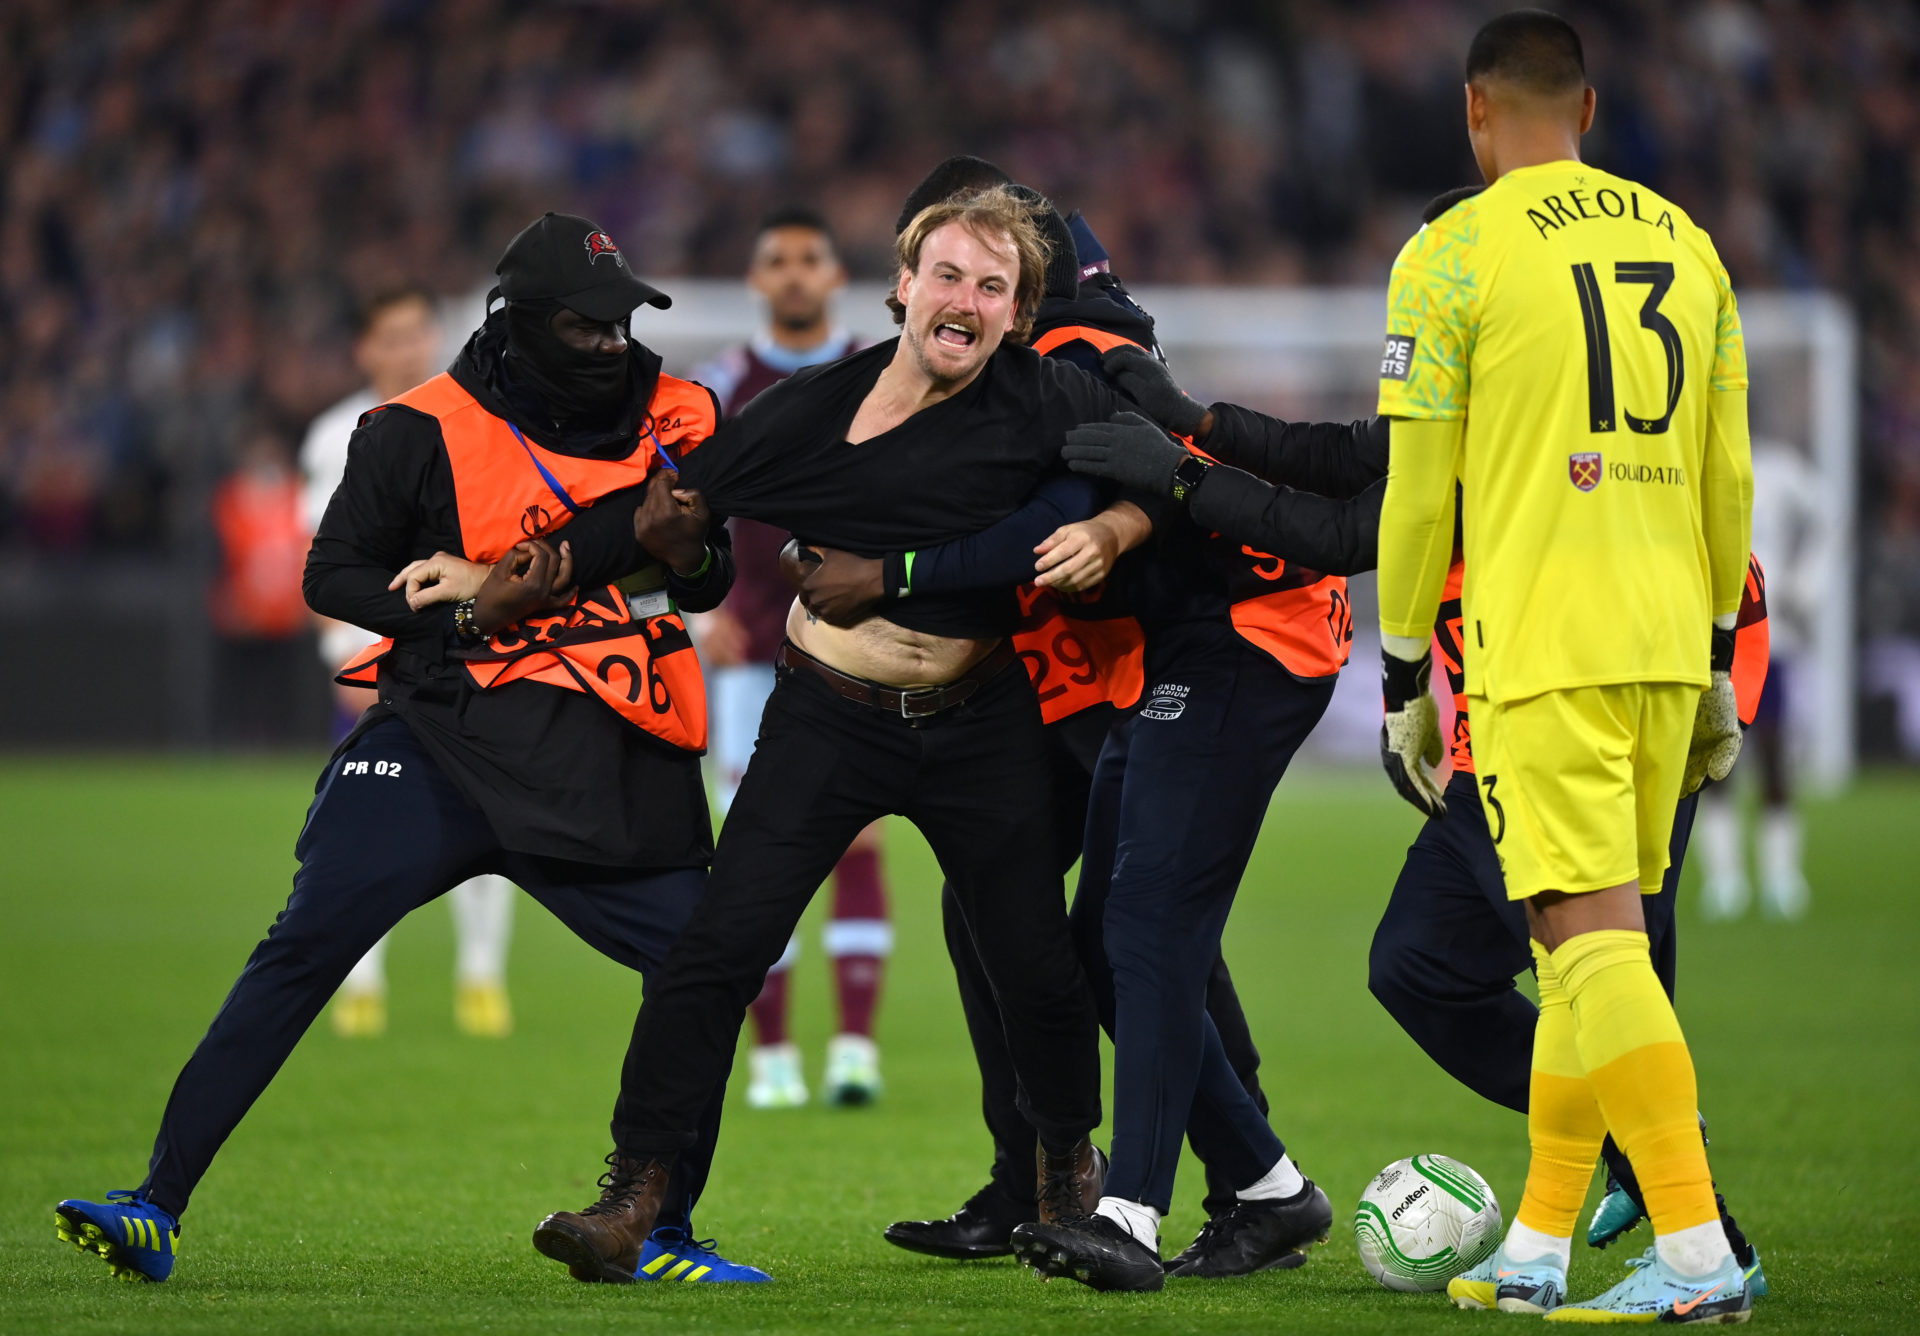 Anderlecht pitch invader tried to tackle Areola but he put him on his back